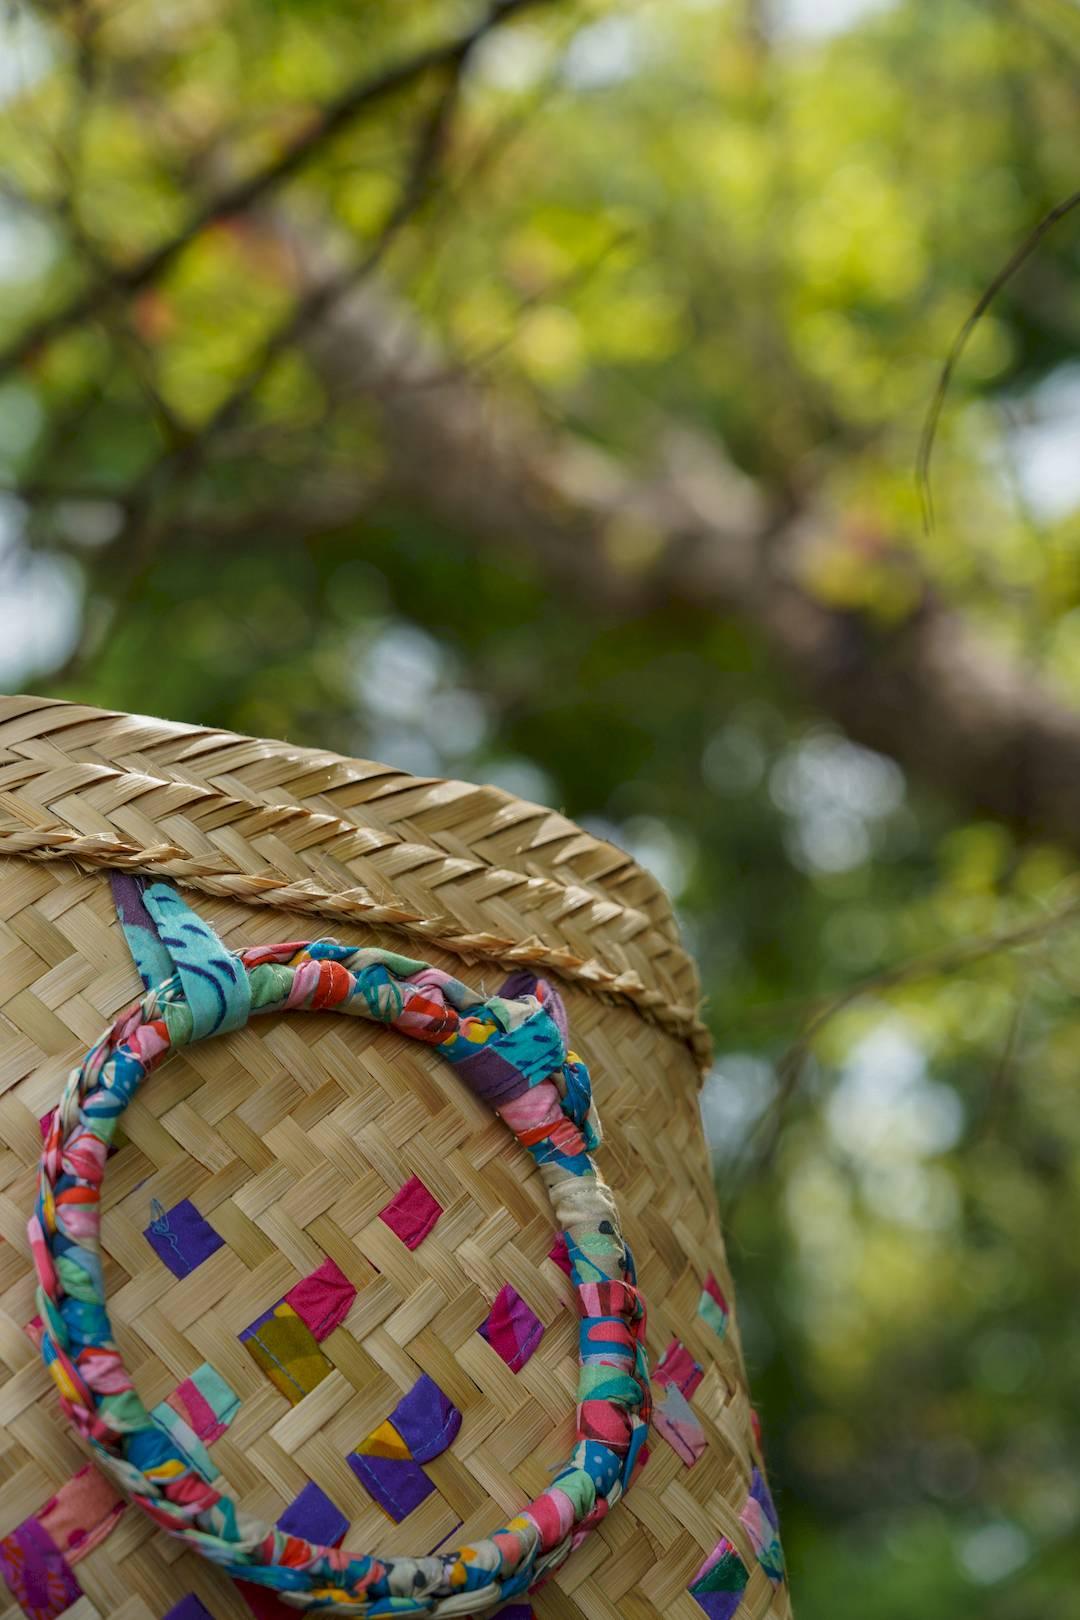 Bamboo handwoven bag made by artisans in Goa